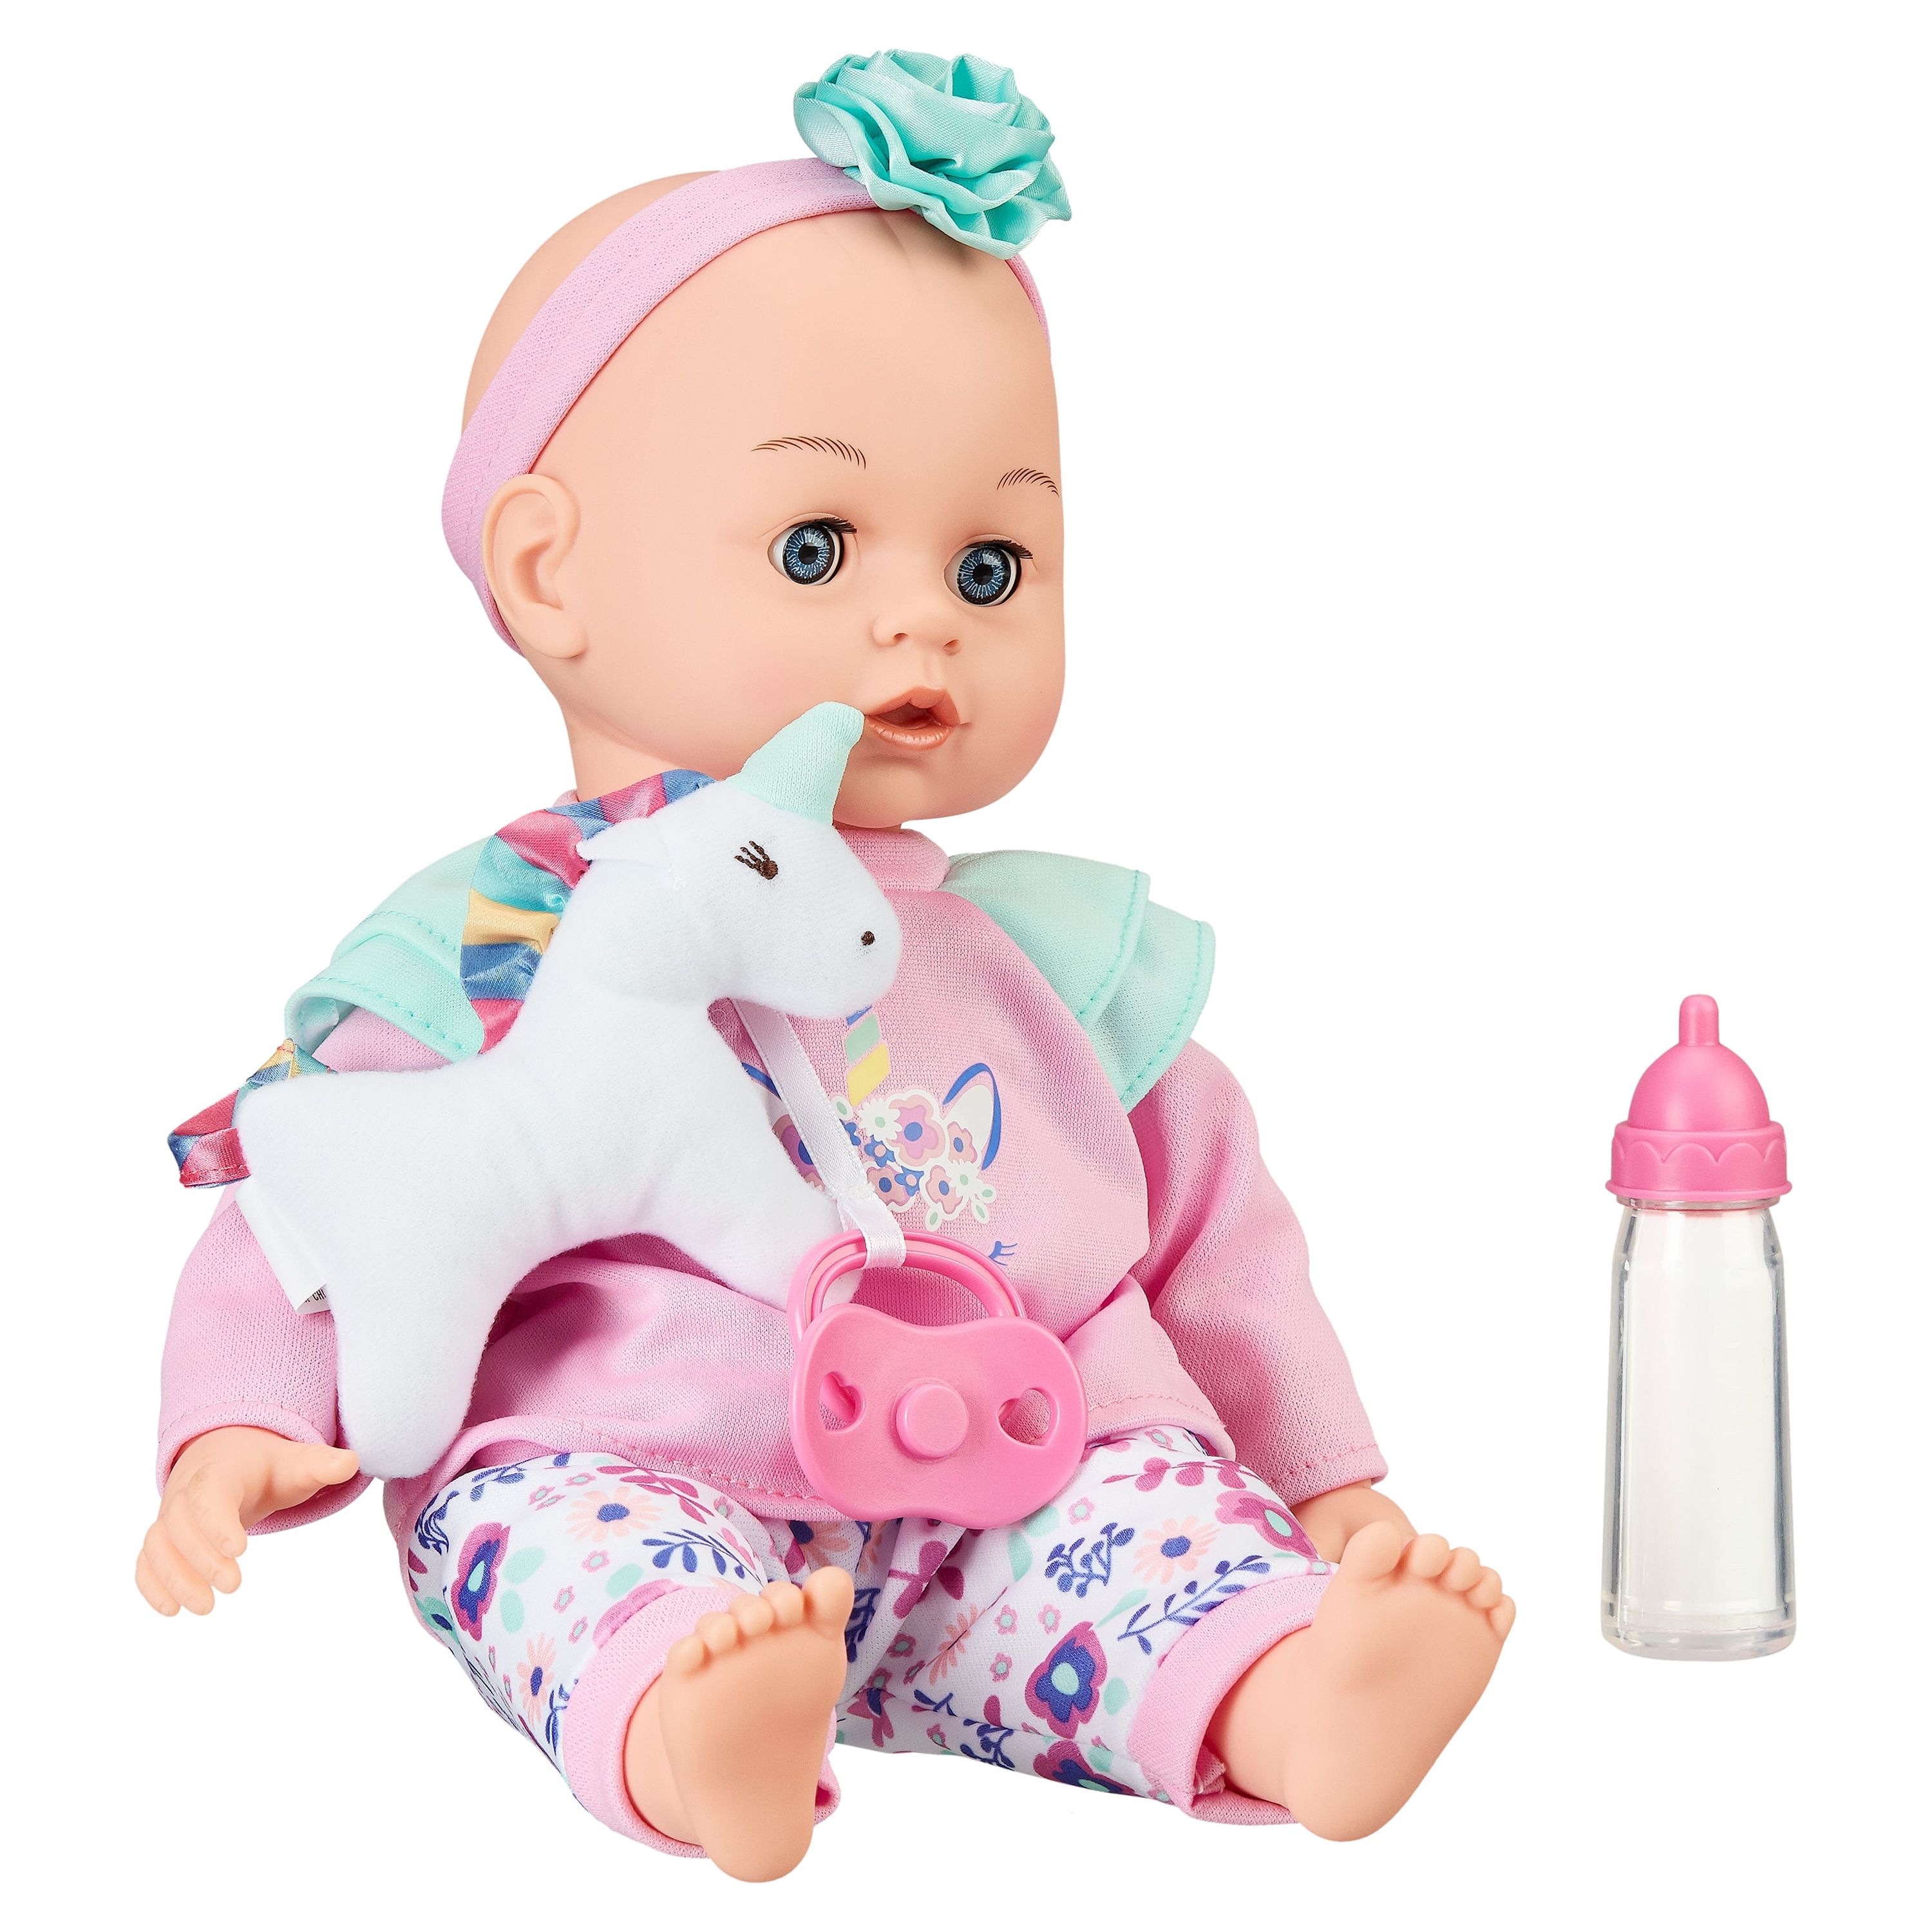 My Sweet Love Sweet Baby Doll Toy Set, 4 Pieces - image 1 of 5